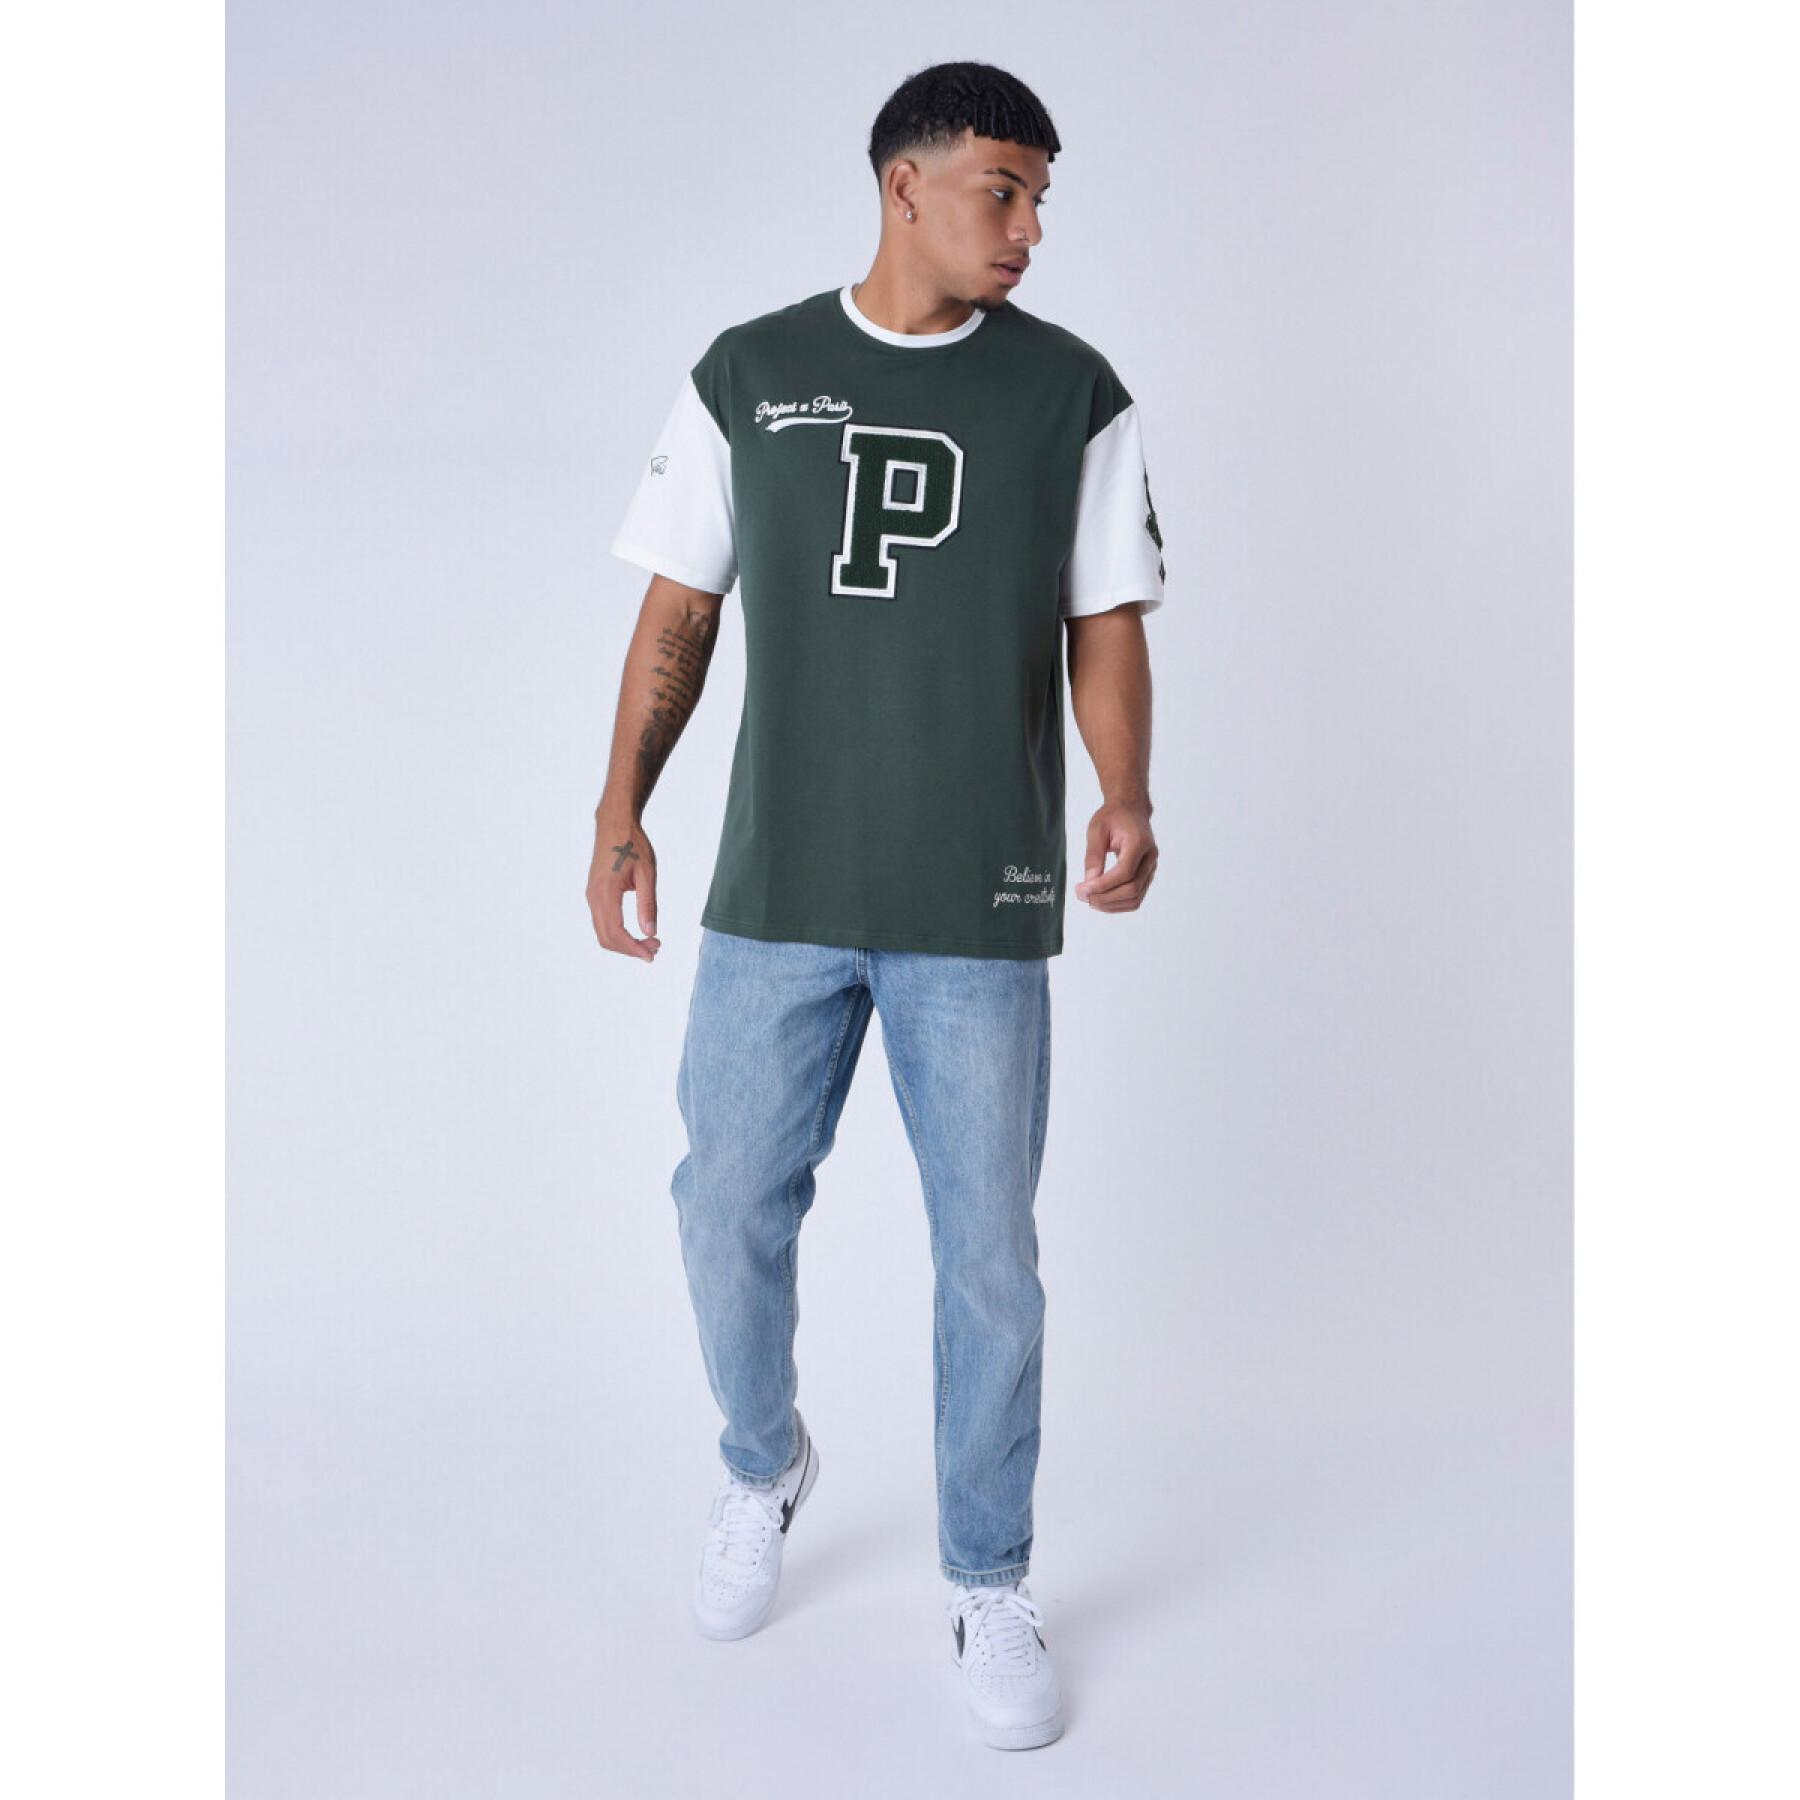 Two-tone college style T-shirt Project X Paris